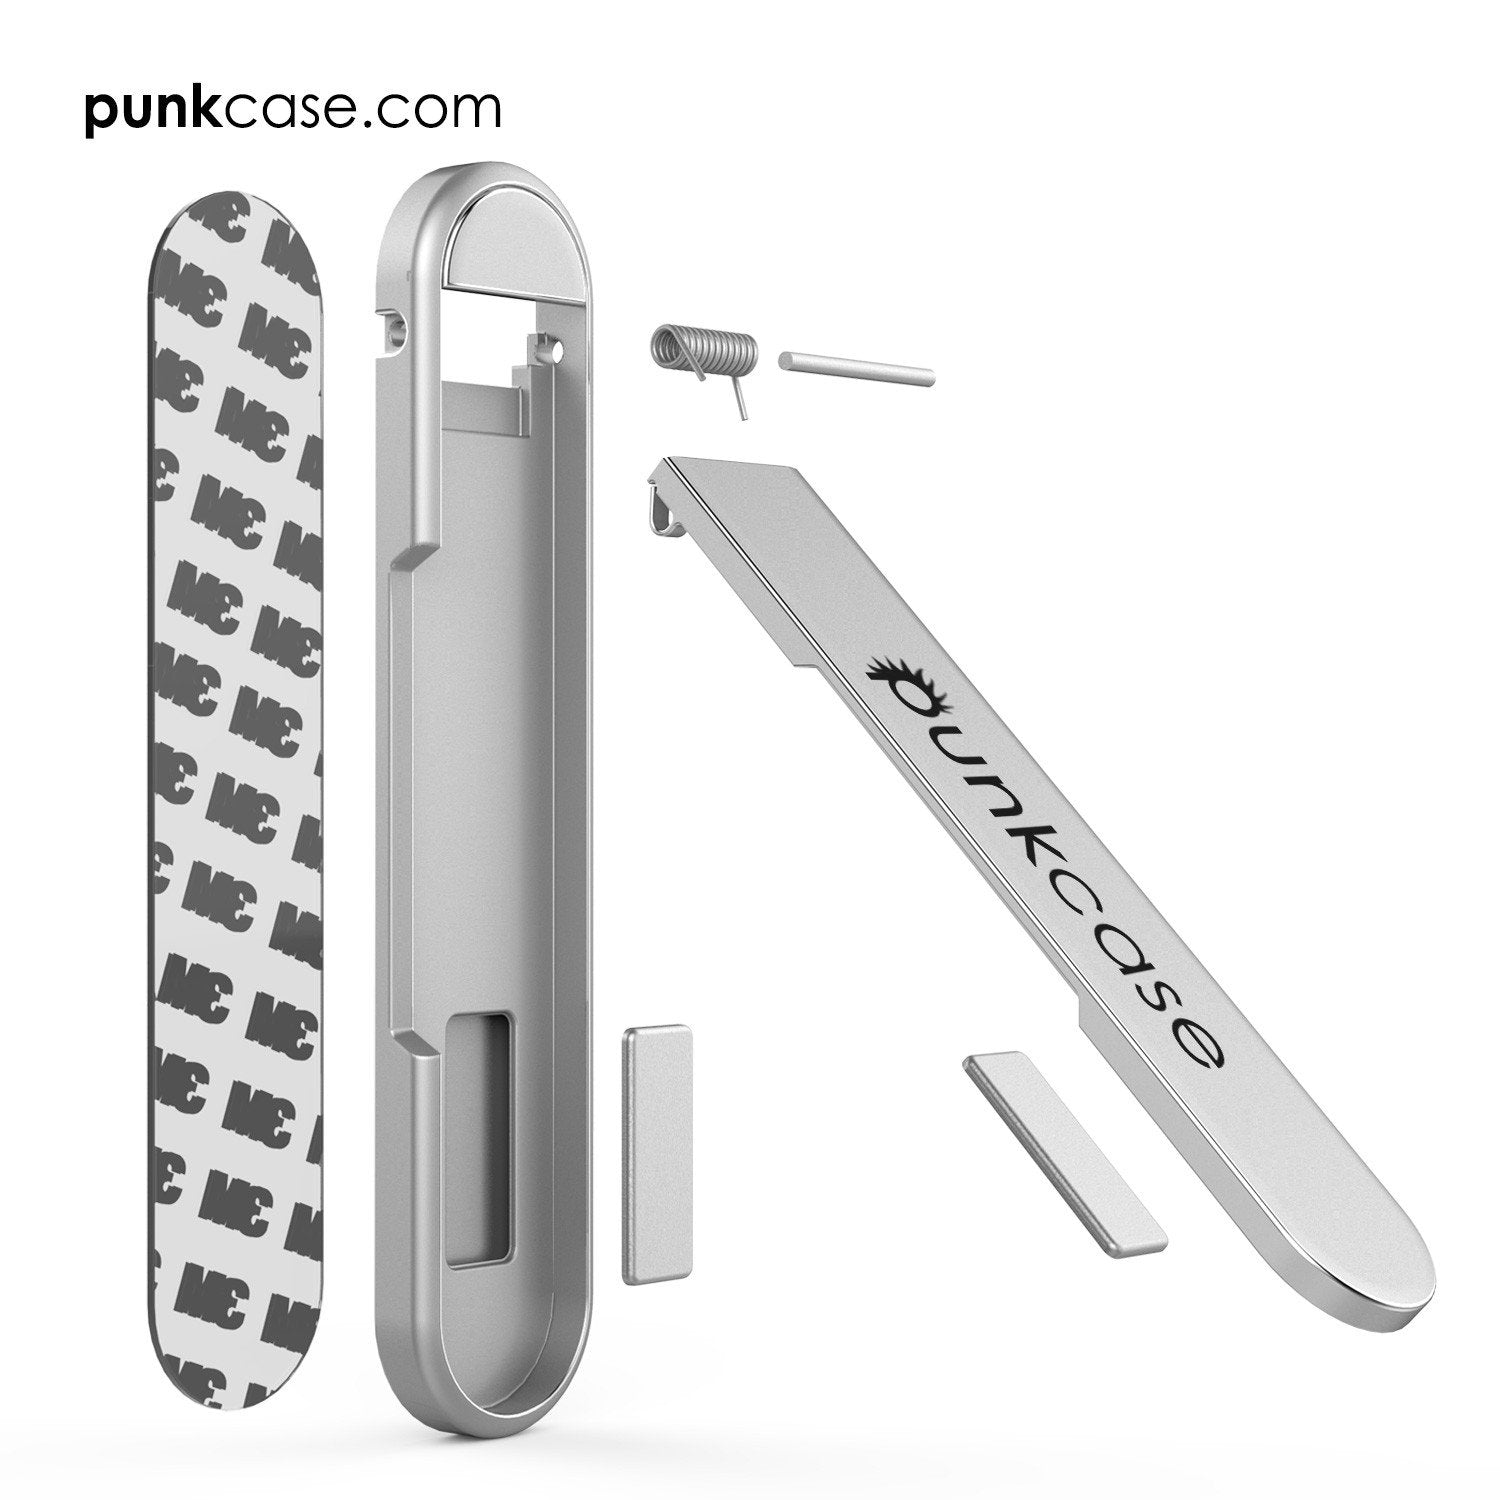 PUNKCASE FlickStick Universal Cell Phone Kickstand for all Mobile Phones & Cases with Flat Backs, One Finger Operation (Silver)